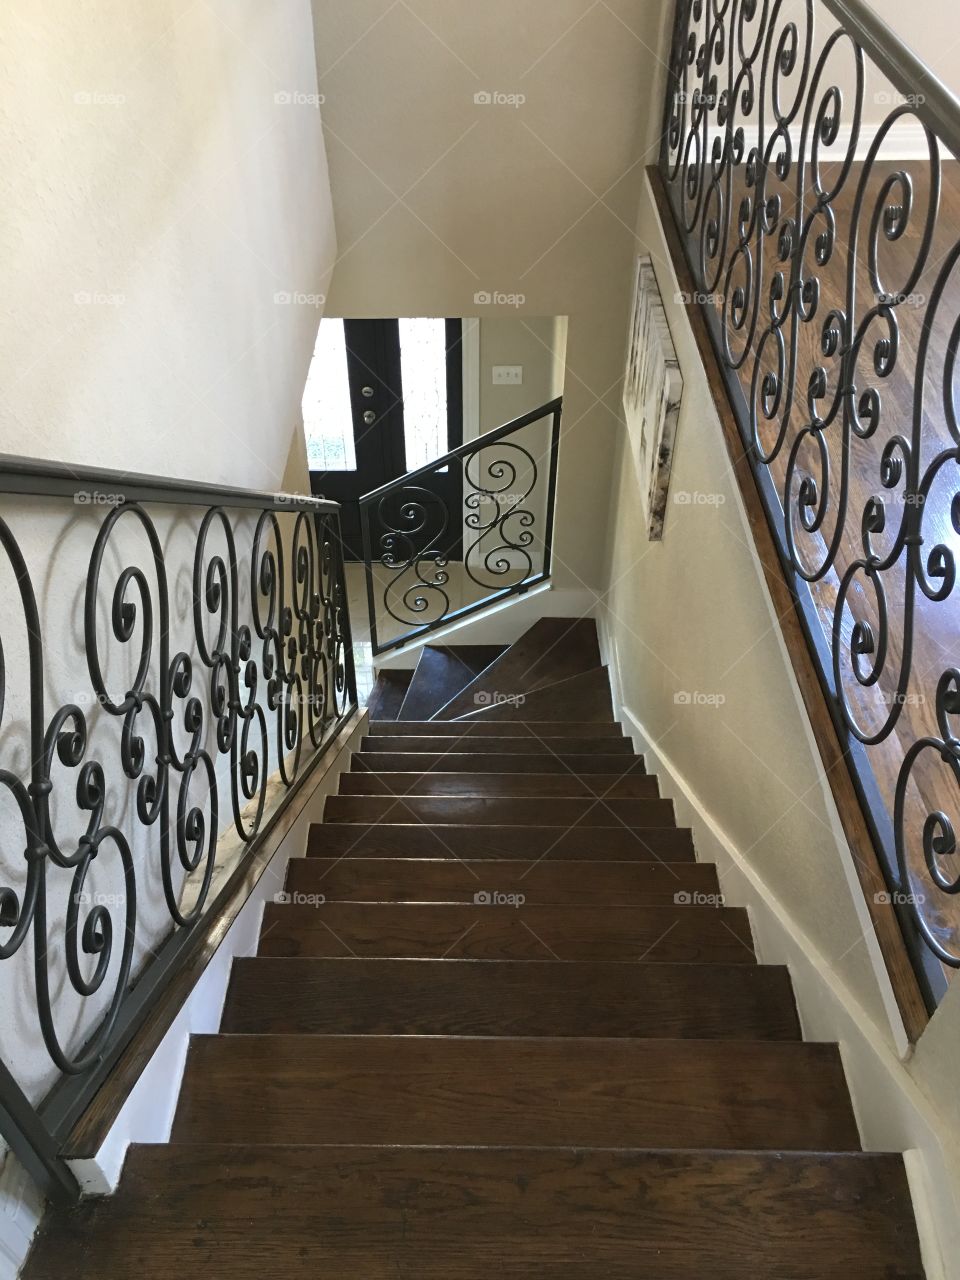 Stairway, stairwell, wooden steps with wrought iron railings, old house, hardwood floors